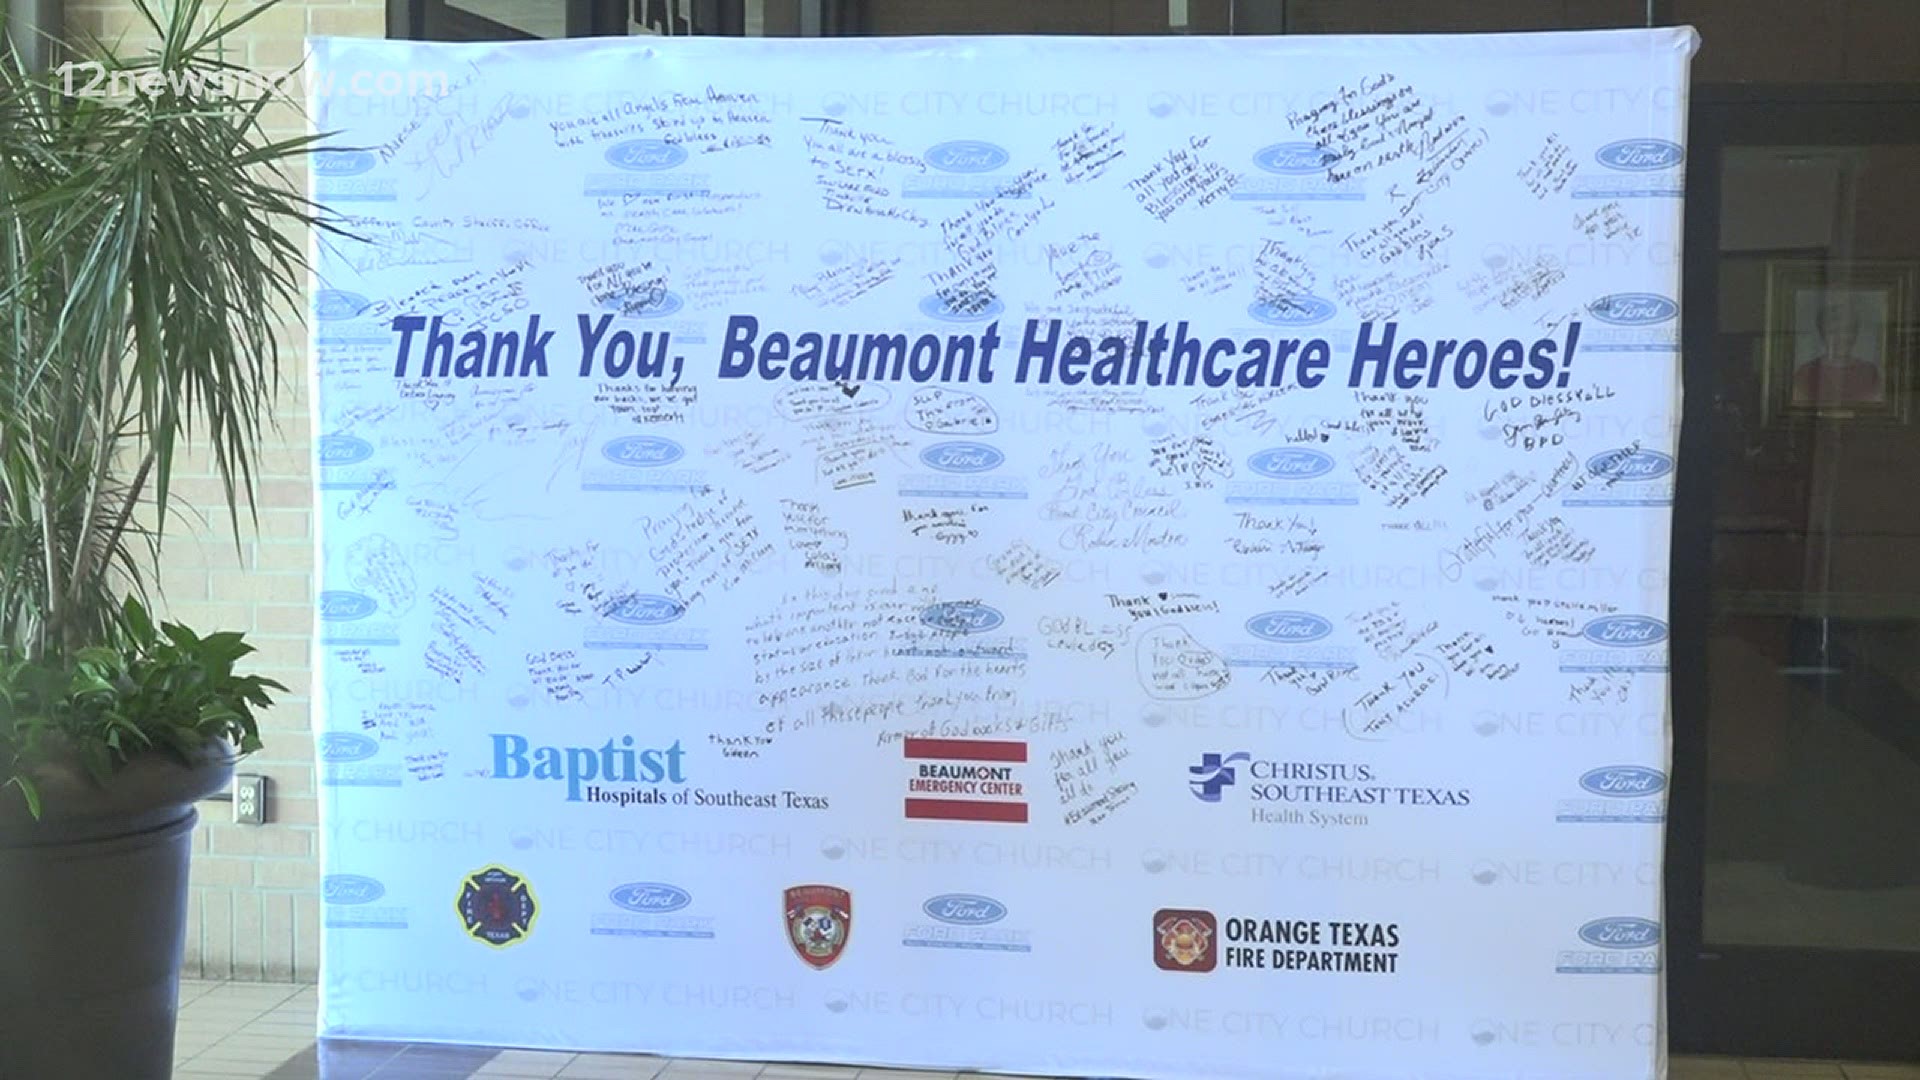 A brief, handwritten message goes a long way. The wall will move around the community for people to give thanks to more healthcare workers and first responders.